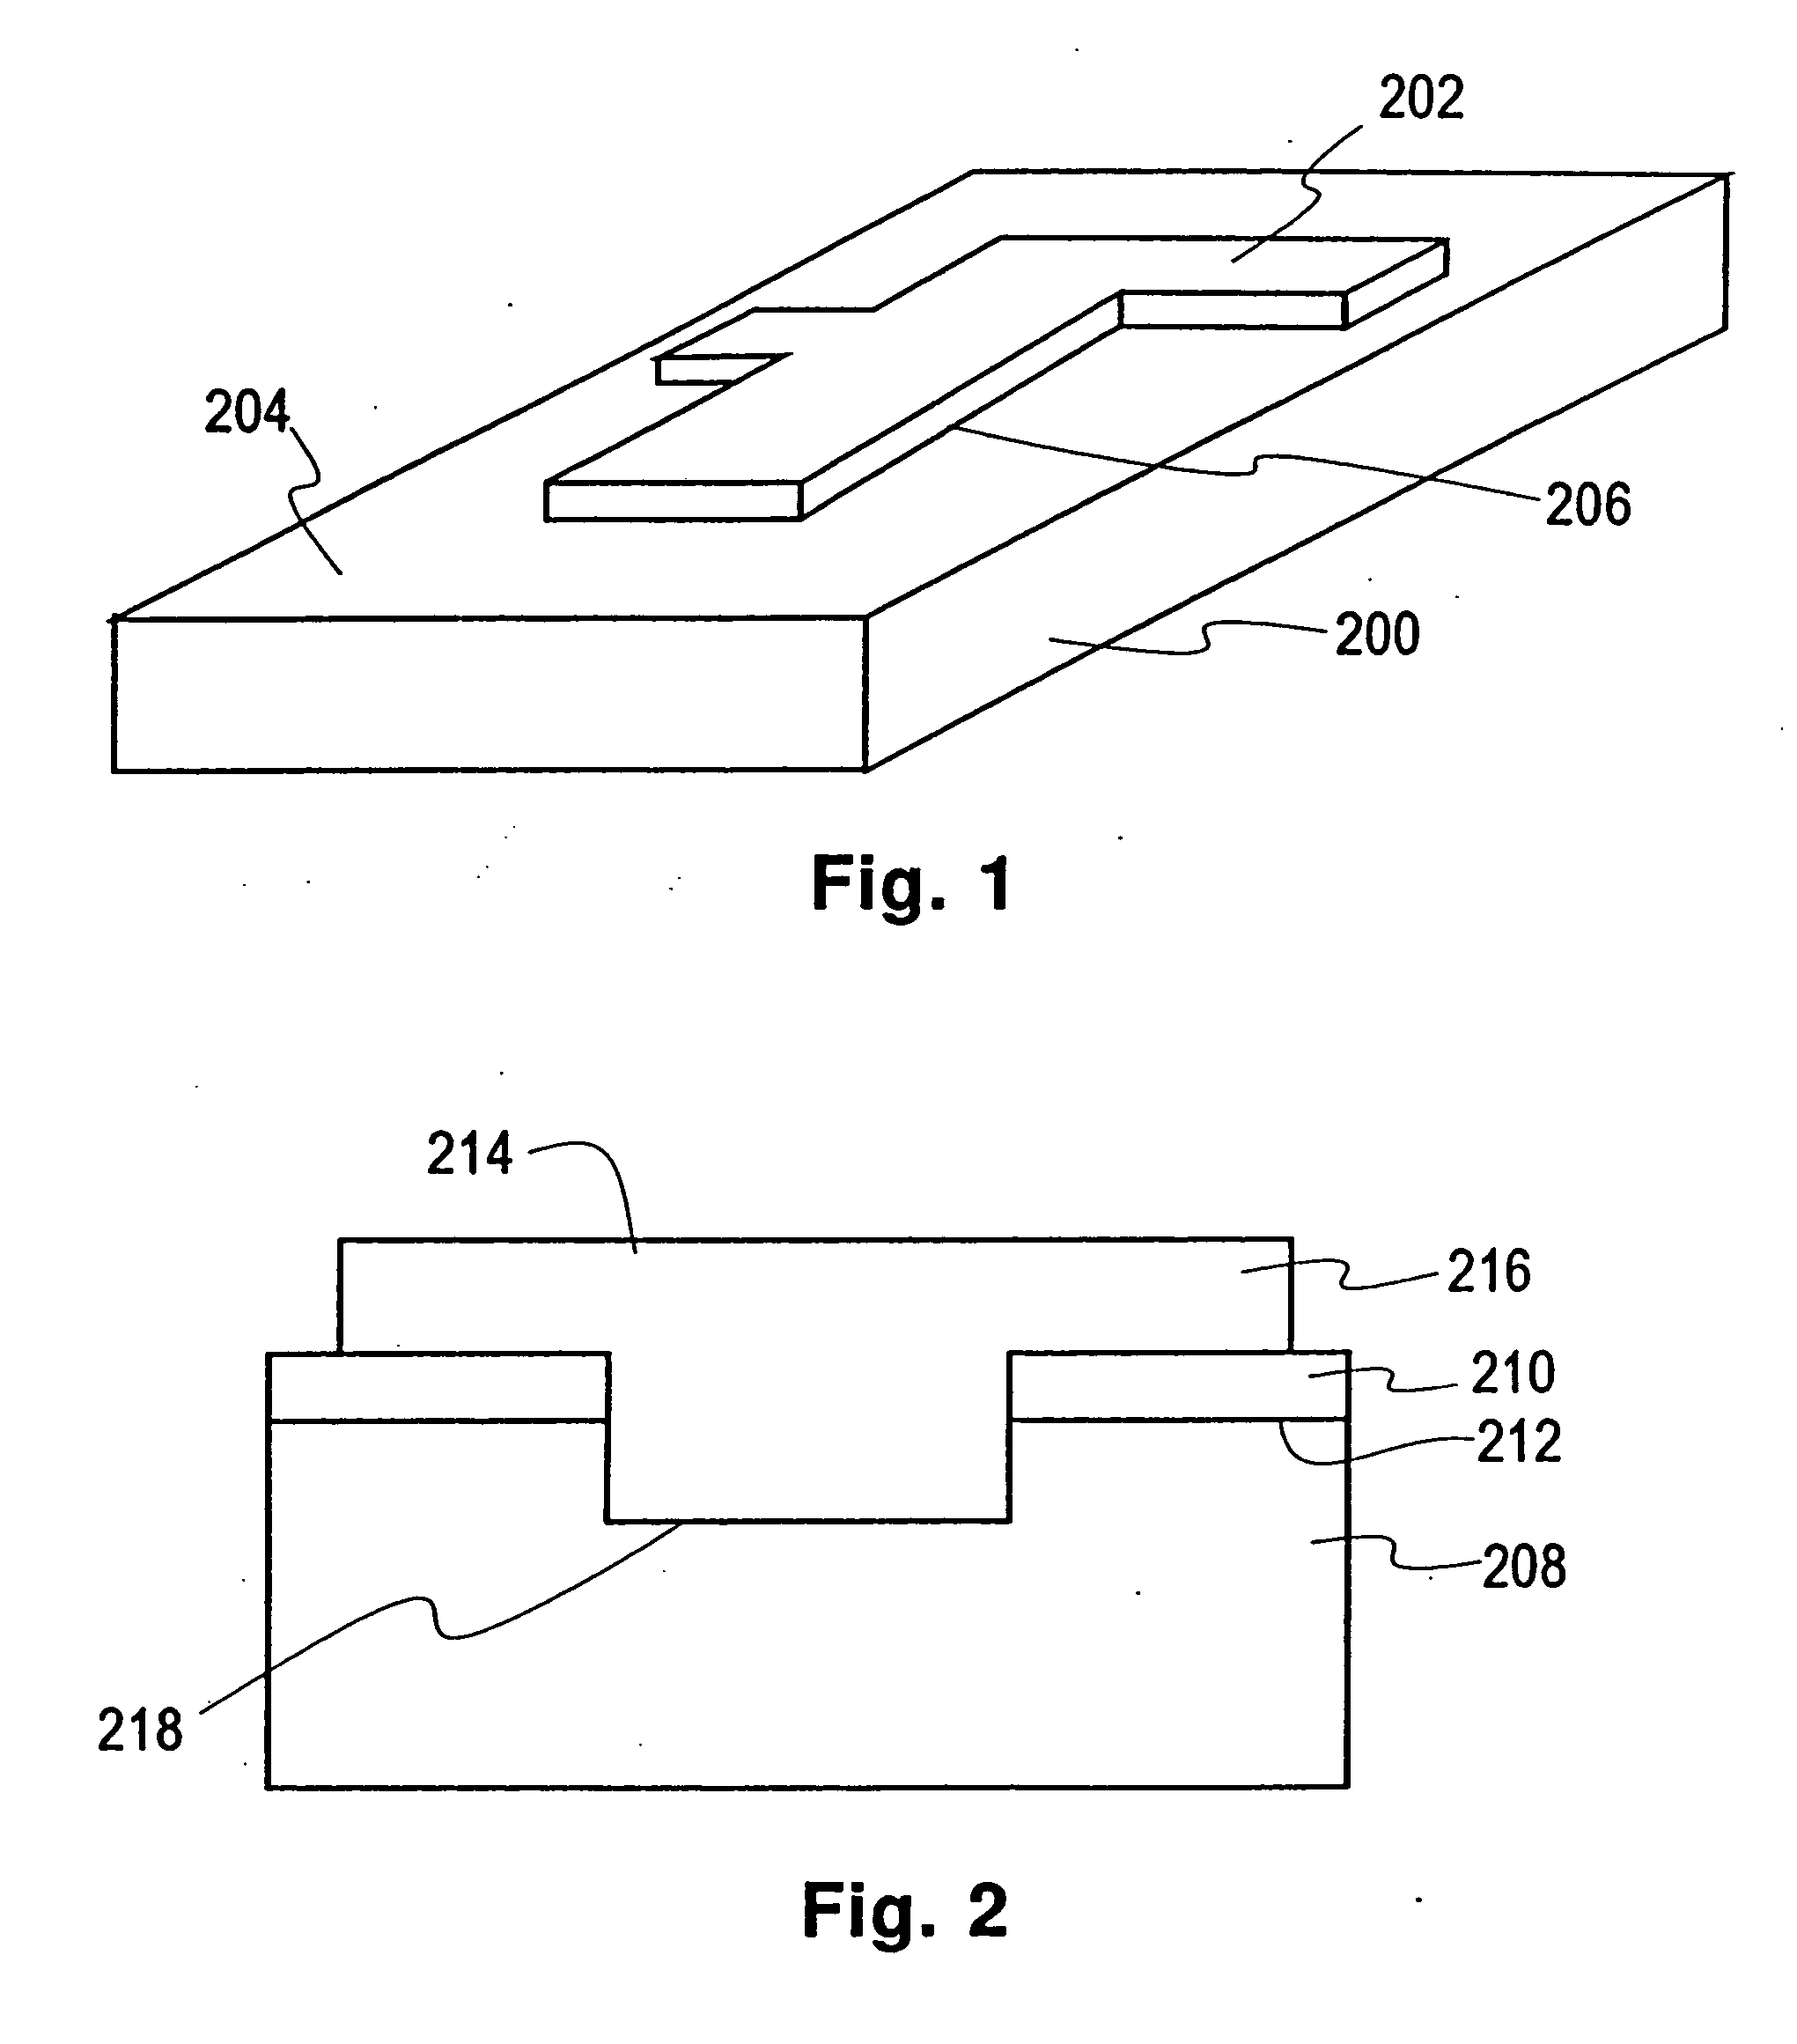 Patterns of electrically conducting polymers and their application as electrodes or electrical contacts